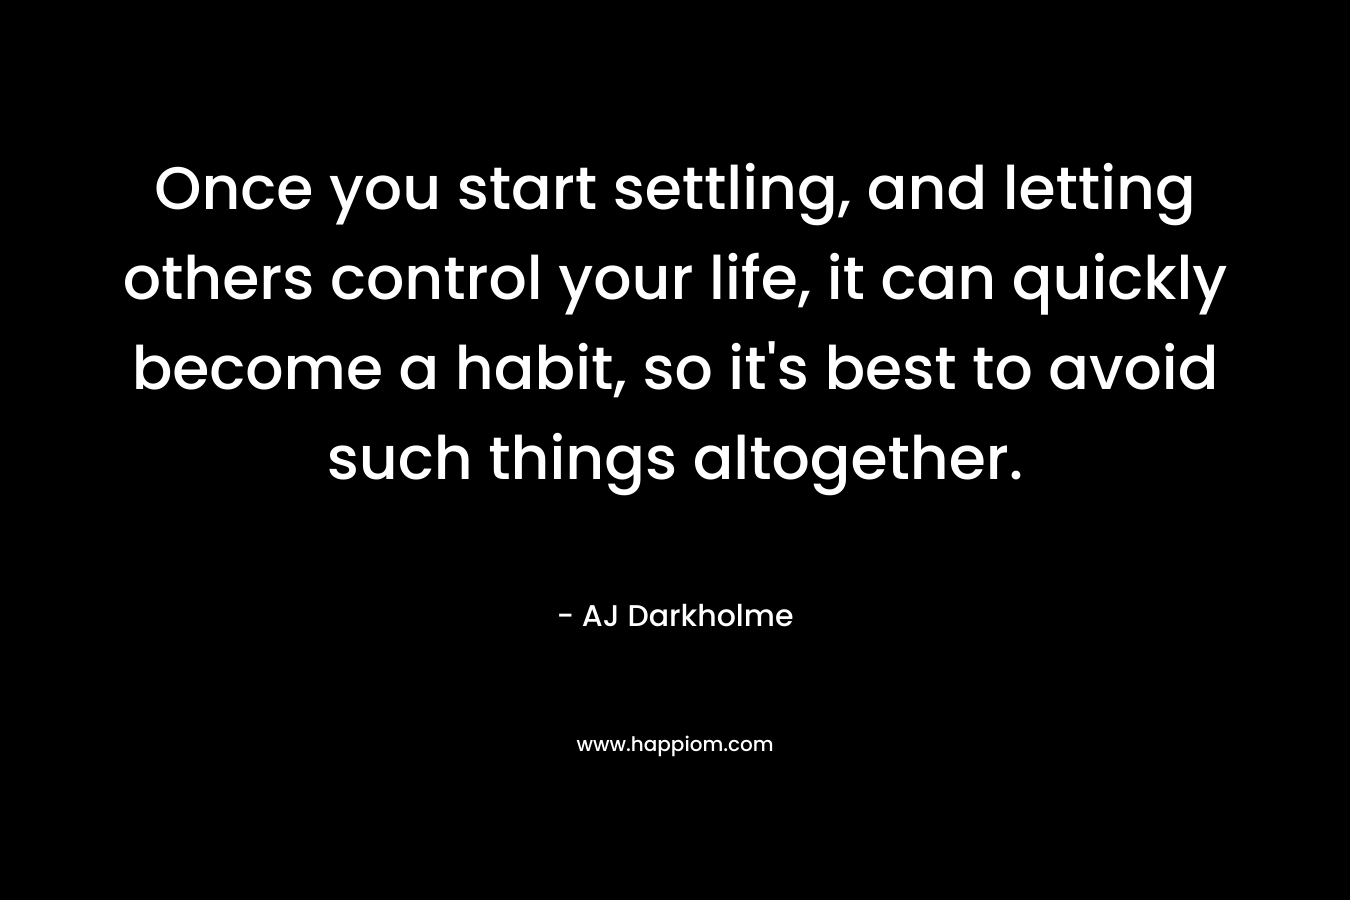 Once you start settling, and letting others control your life, it can quickly become a habit, so it’s best to avoid such things altogether. – AJ Darkholme